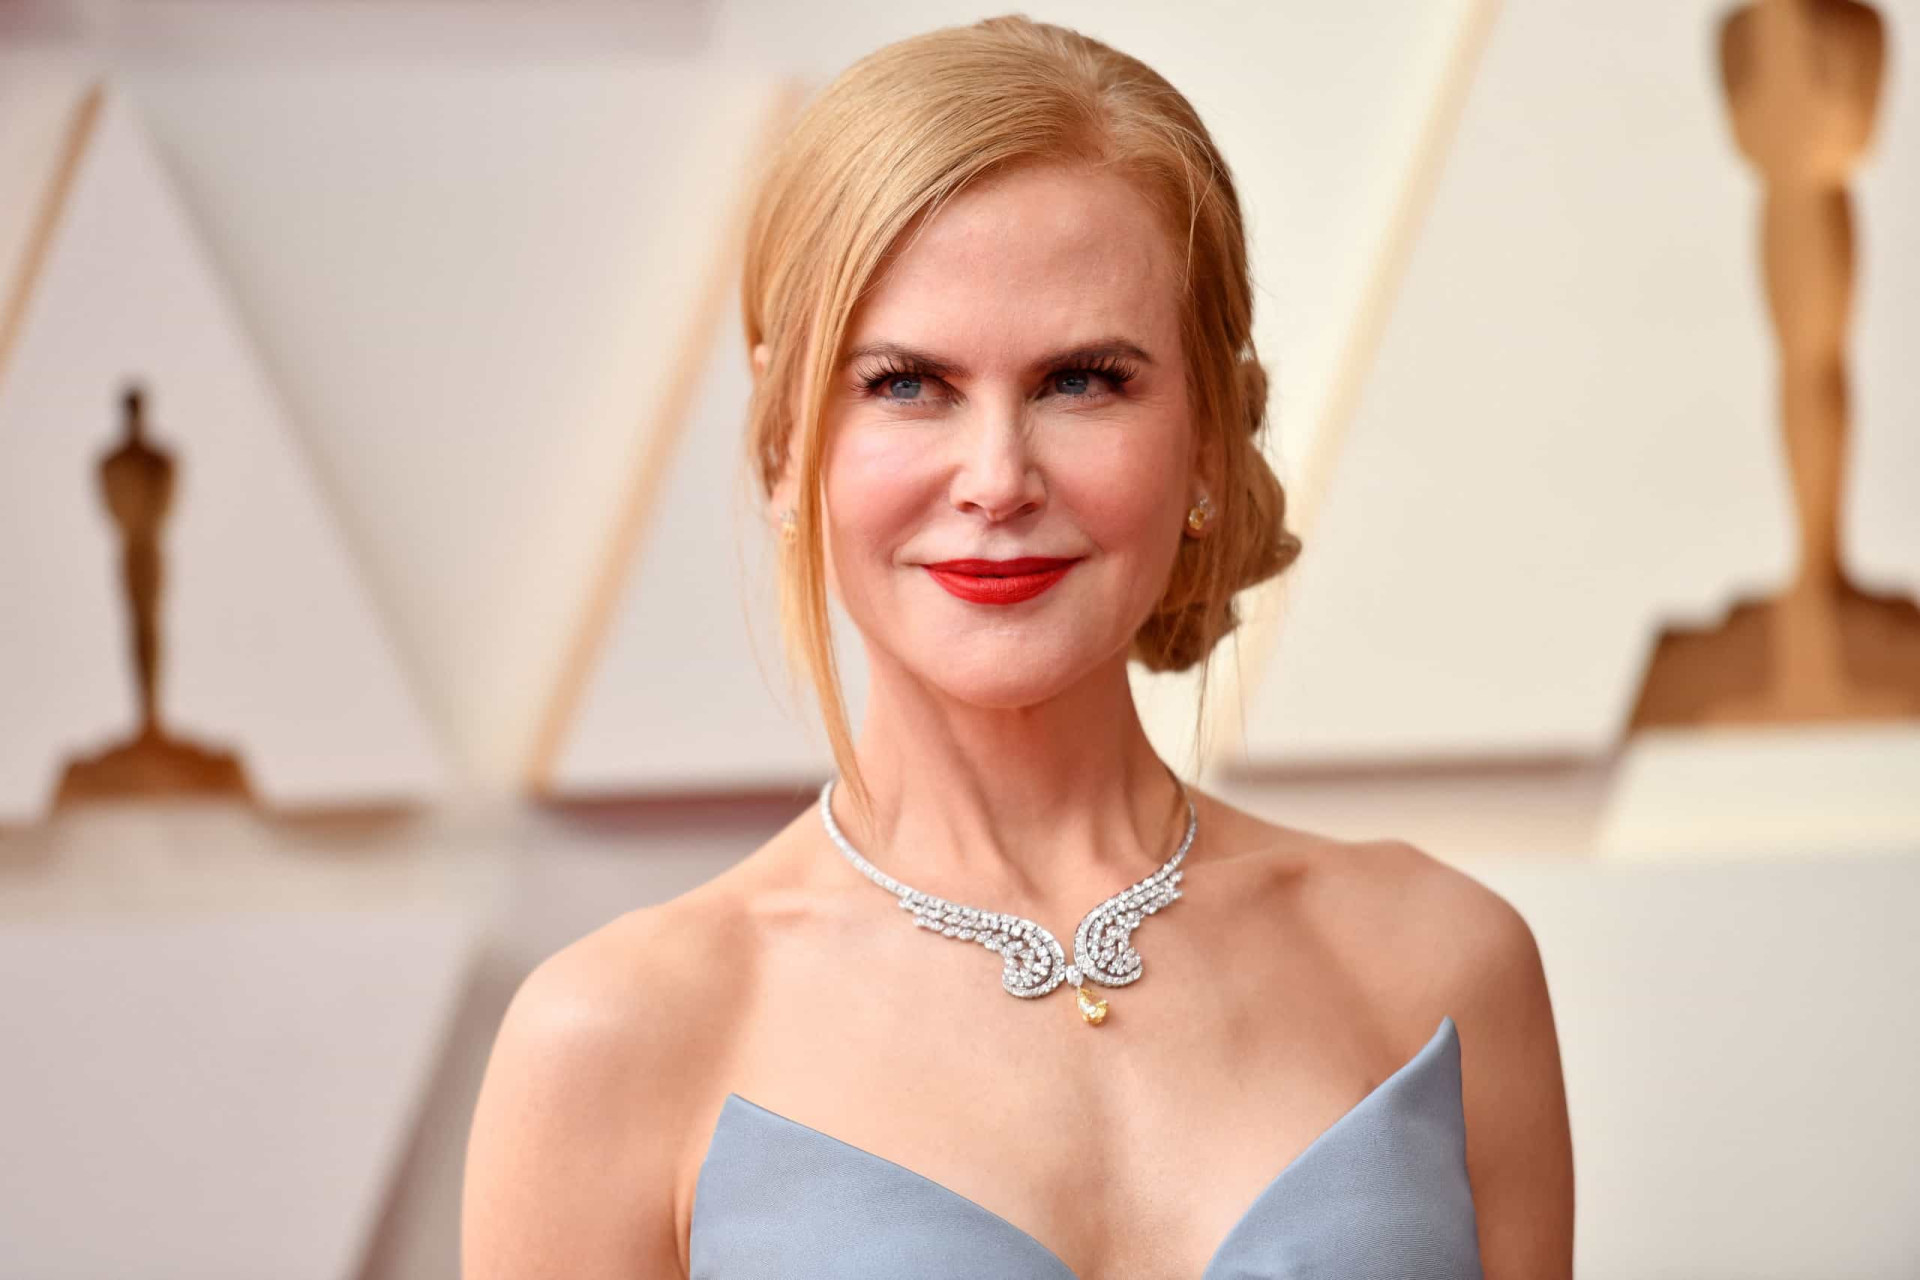 <p><span>Another of Tom Cruise's former wives, Kidman became involved around the same time as their marriage in 1990.</span></p><p><a href="https://www.msn.com/en-us/community/channel/vid-7xx8mnucu55yw63we9va2gwr7uihbxwc68fxqp25x6tg4ftibpra?cvid=94631541bc0f4f89bfd59158d696ad7e">Follow us and access great exclusive content every day</a></p>